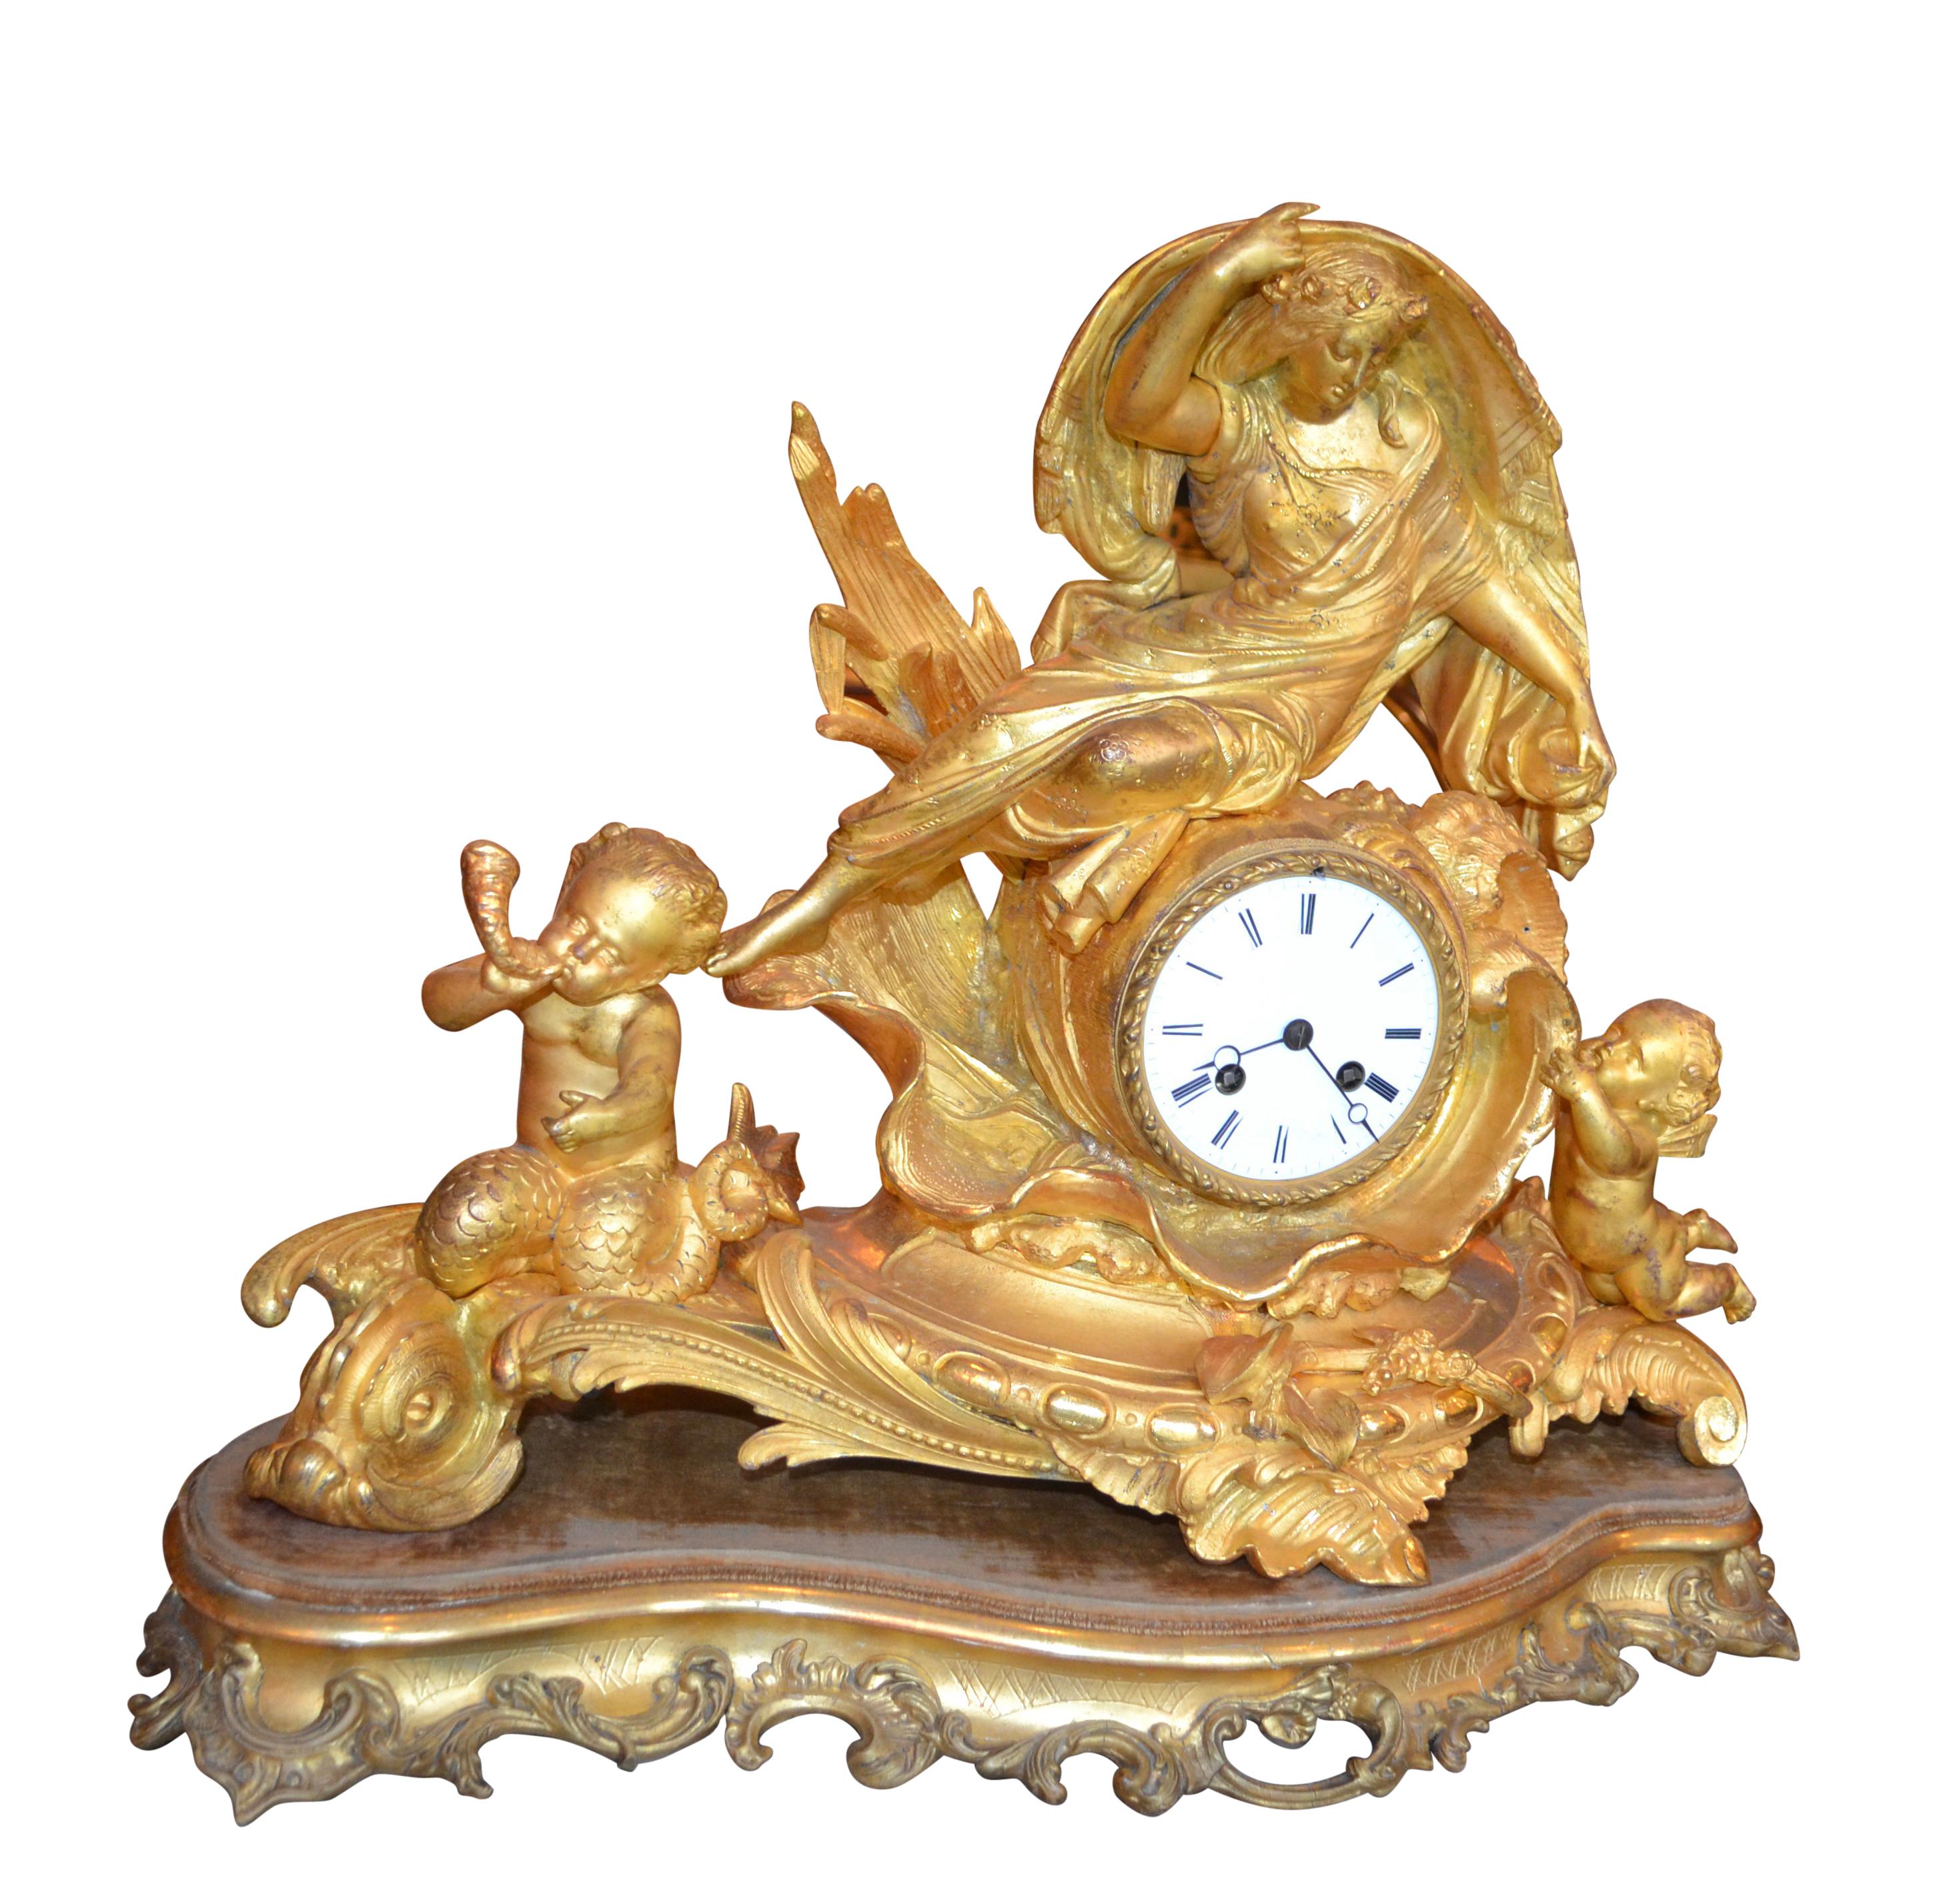 A late 19th century French gilded bronze clock on a gilded wood base. On the left side of the Rococo-style base which resembles rolling waves sits a mermaid like putto riding a dolphin. The right side has another putto reaching up to a large watery